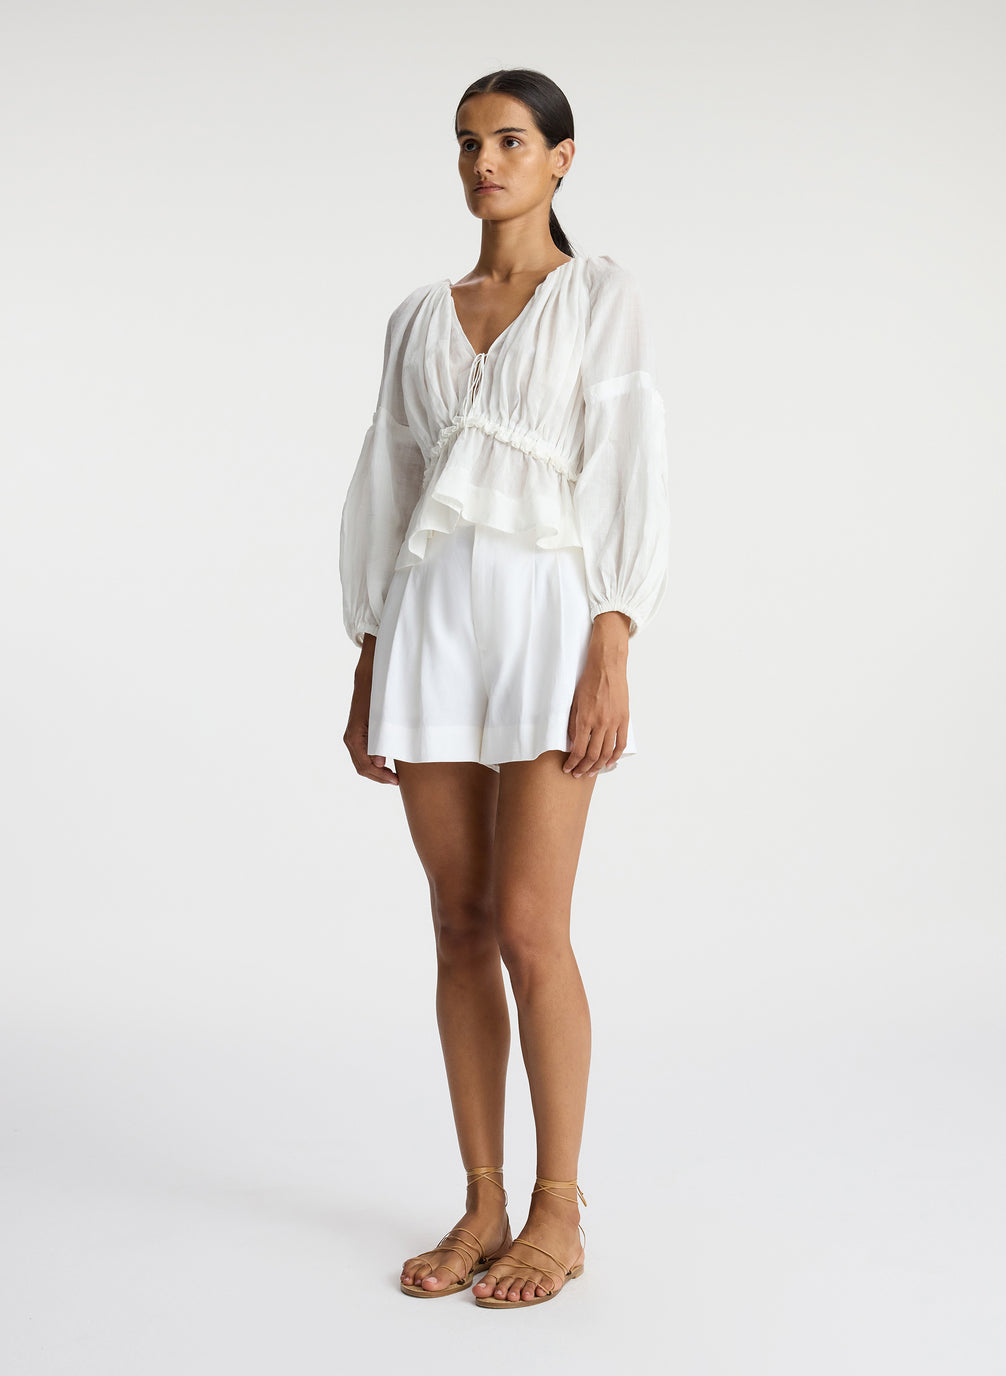 side view of woman wearing white v neck blouse with peplum and white shorts